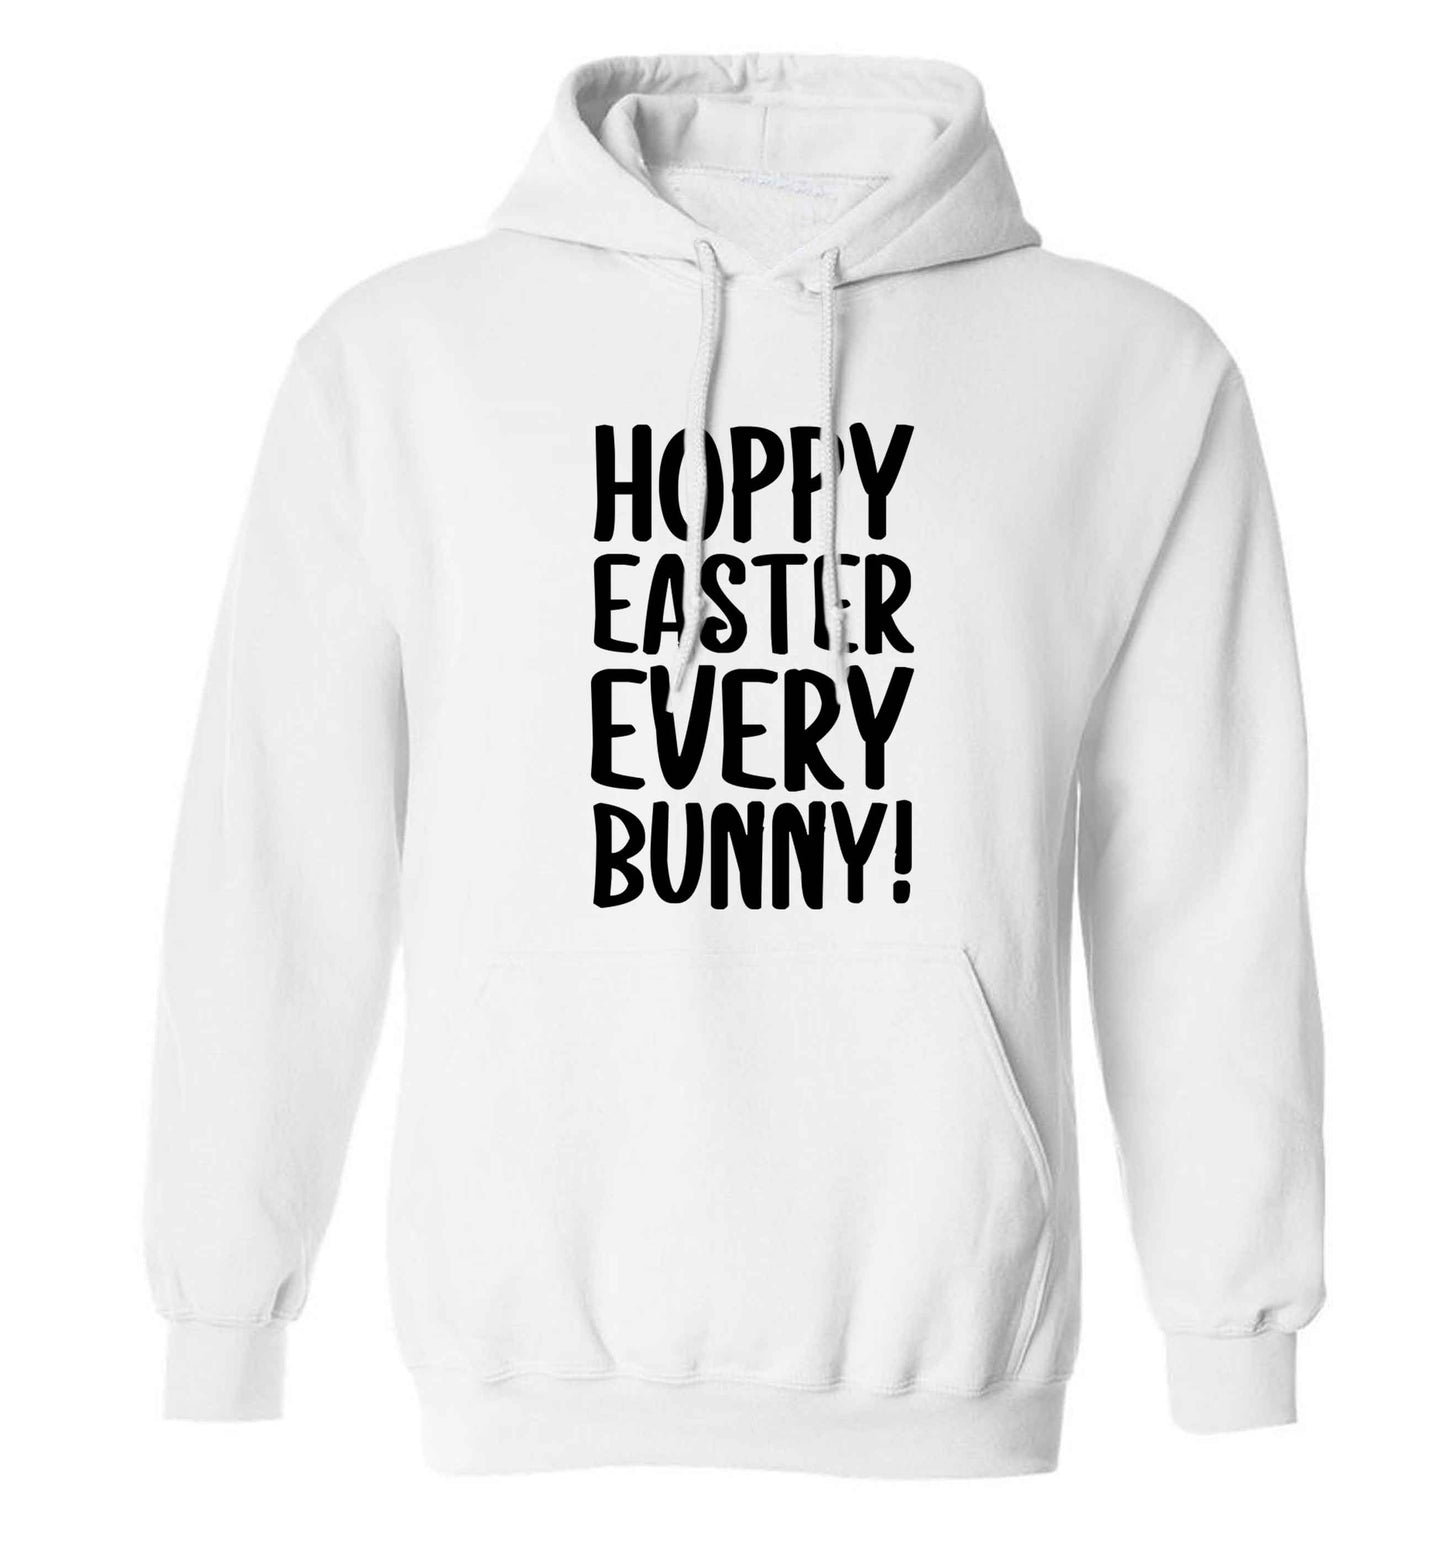 Hoppy Easter every bunny! adults unisex white hoodie 2XL